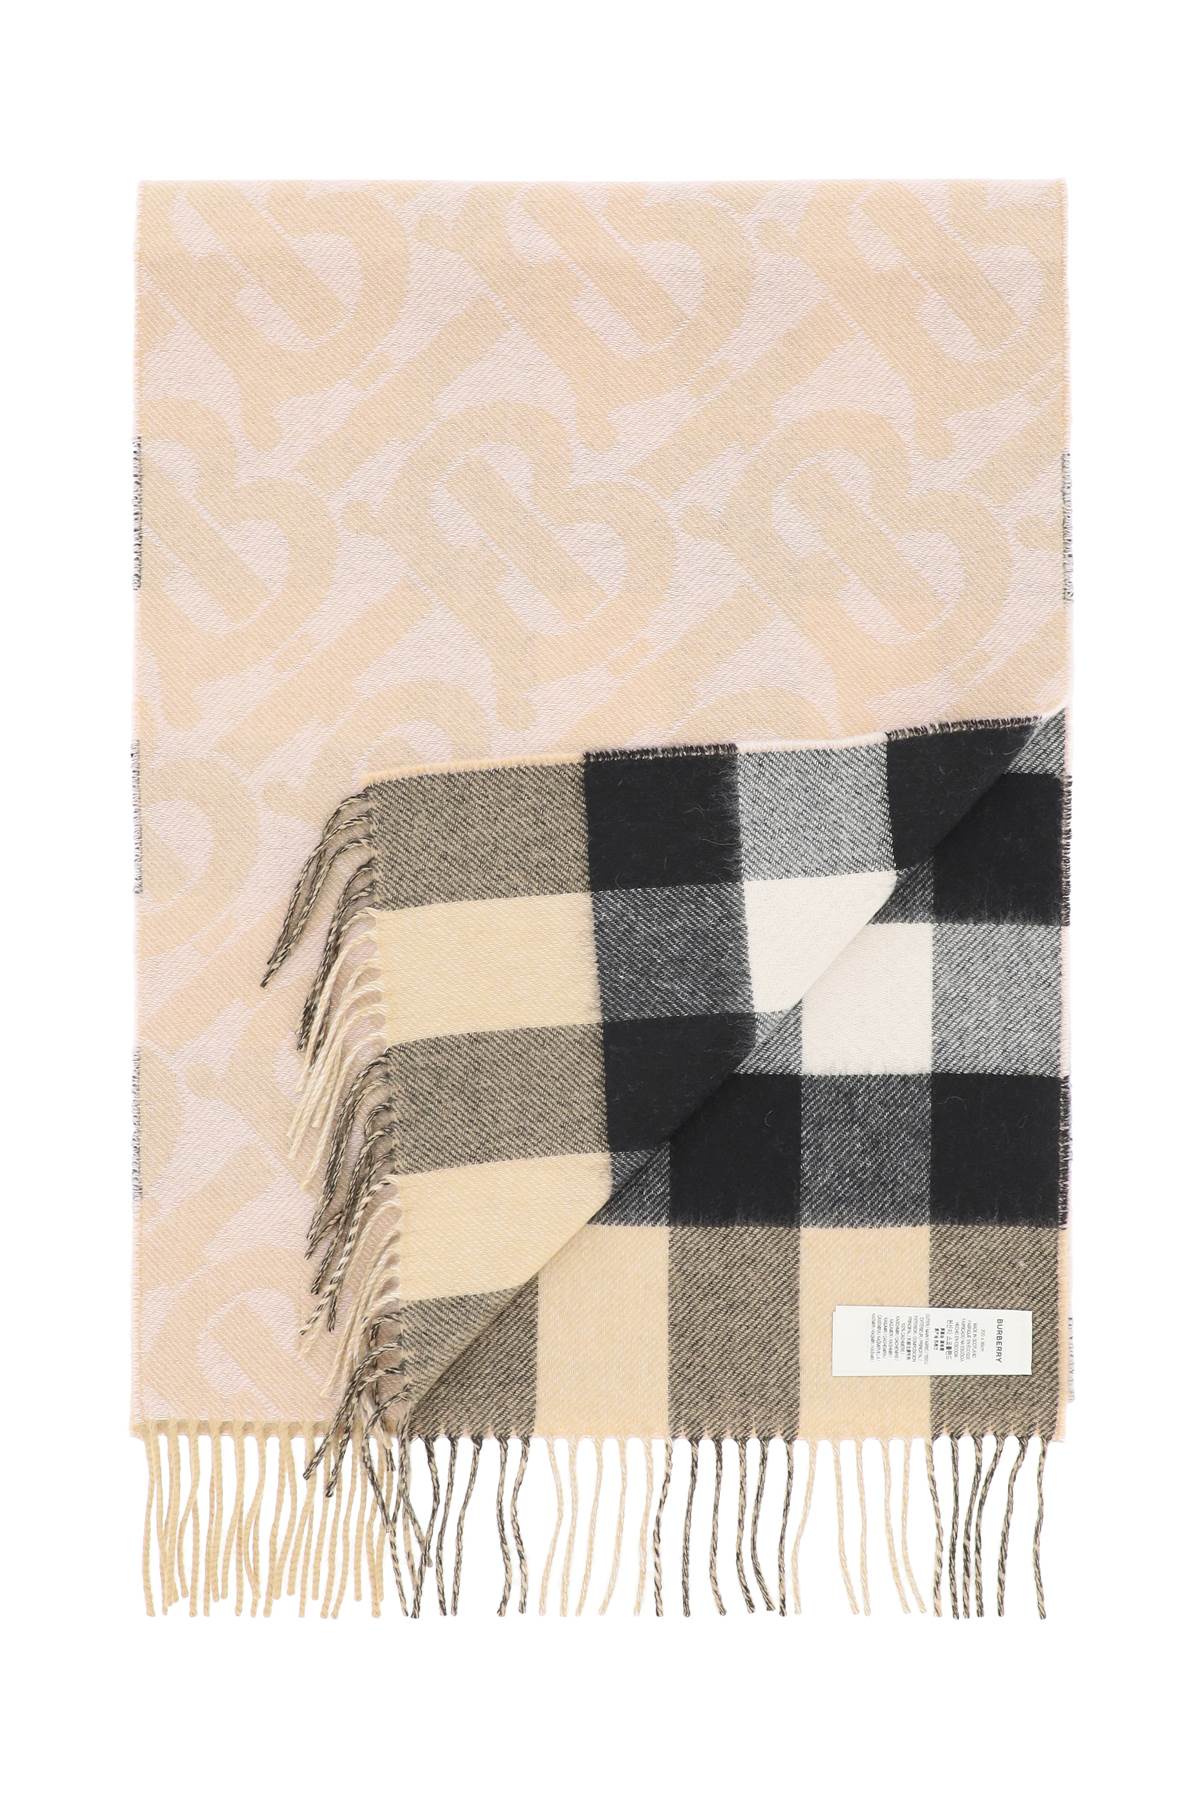 Burberry reversible cashmere scarf